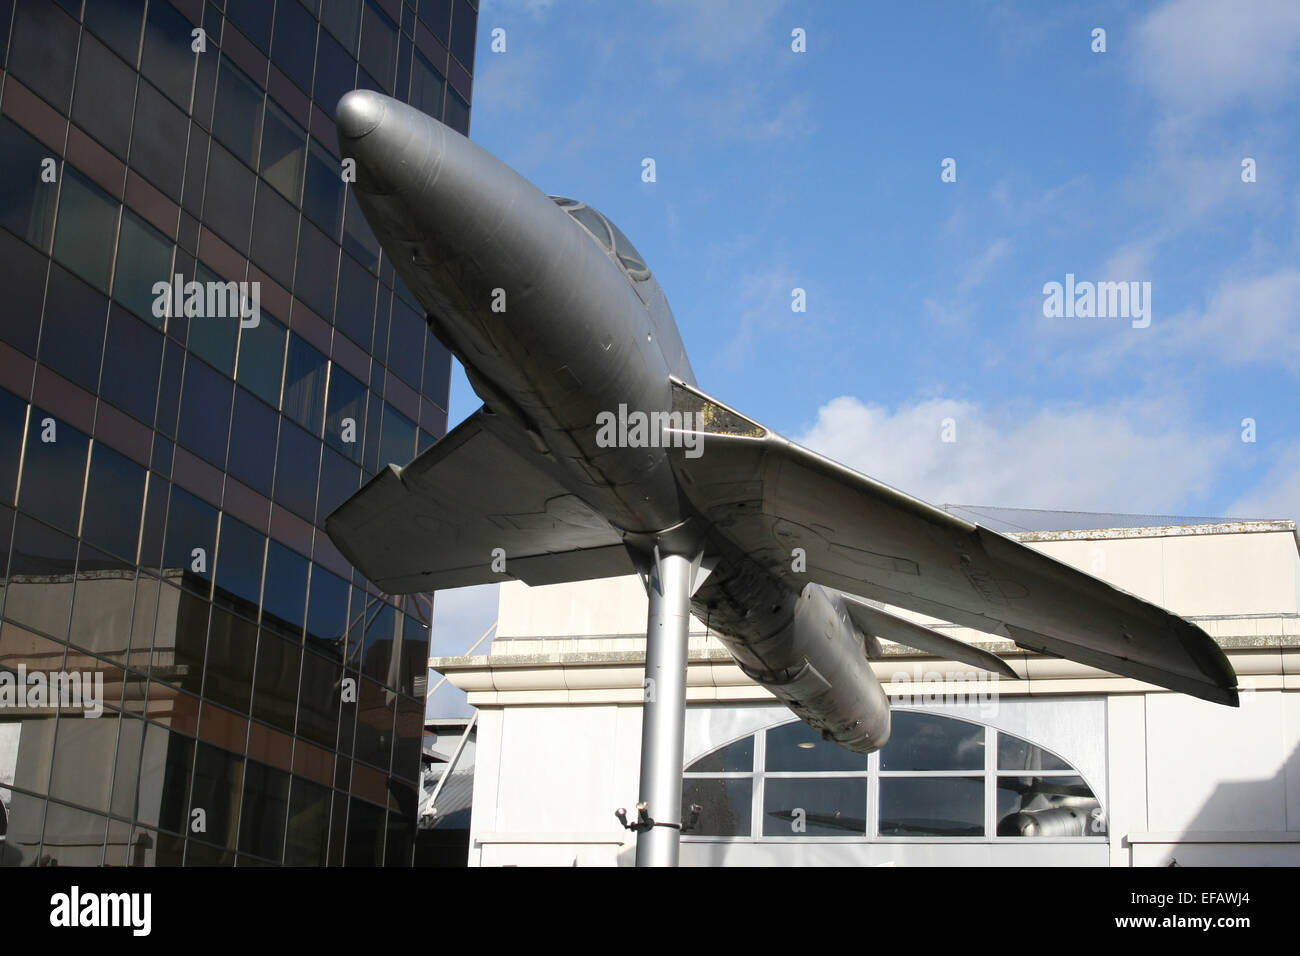 HAWKER HUNTER WOKING TOWN CENTRE PLANE ON A POLE Stock Photo